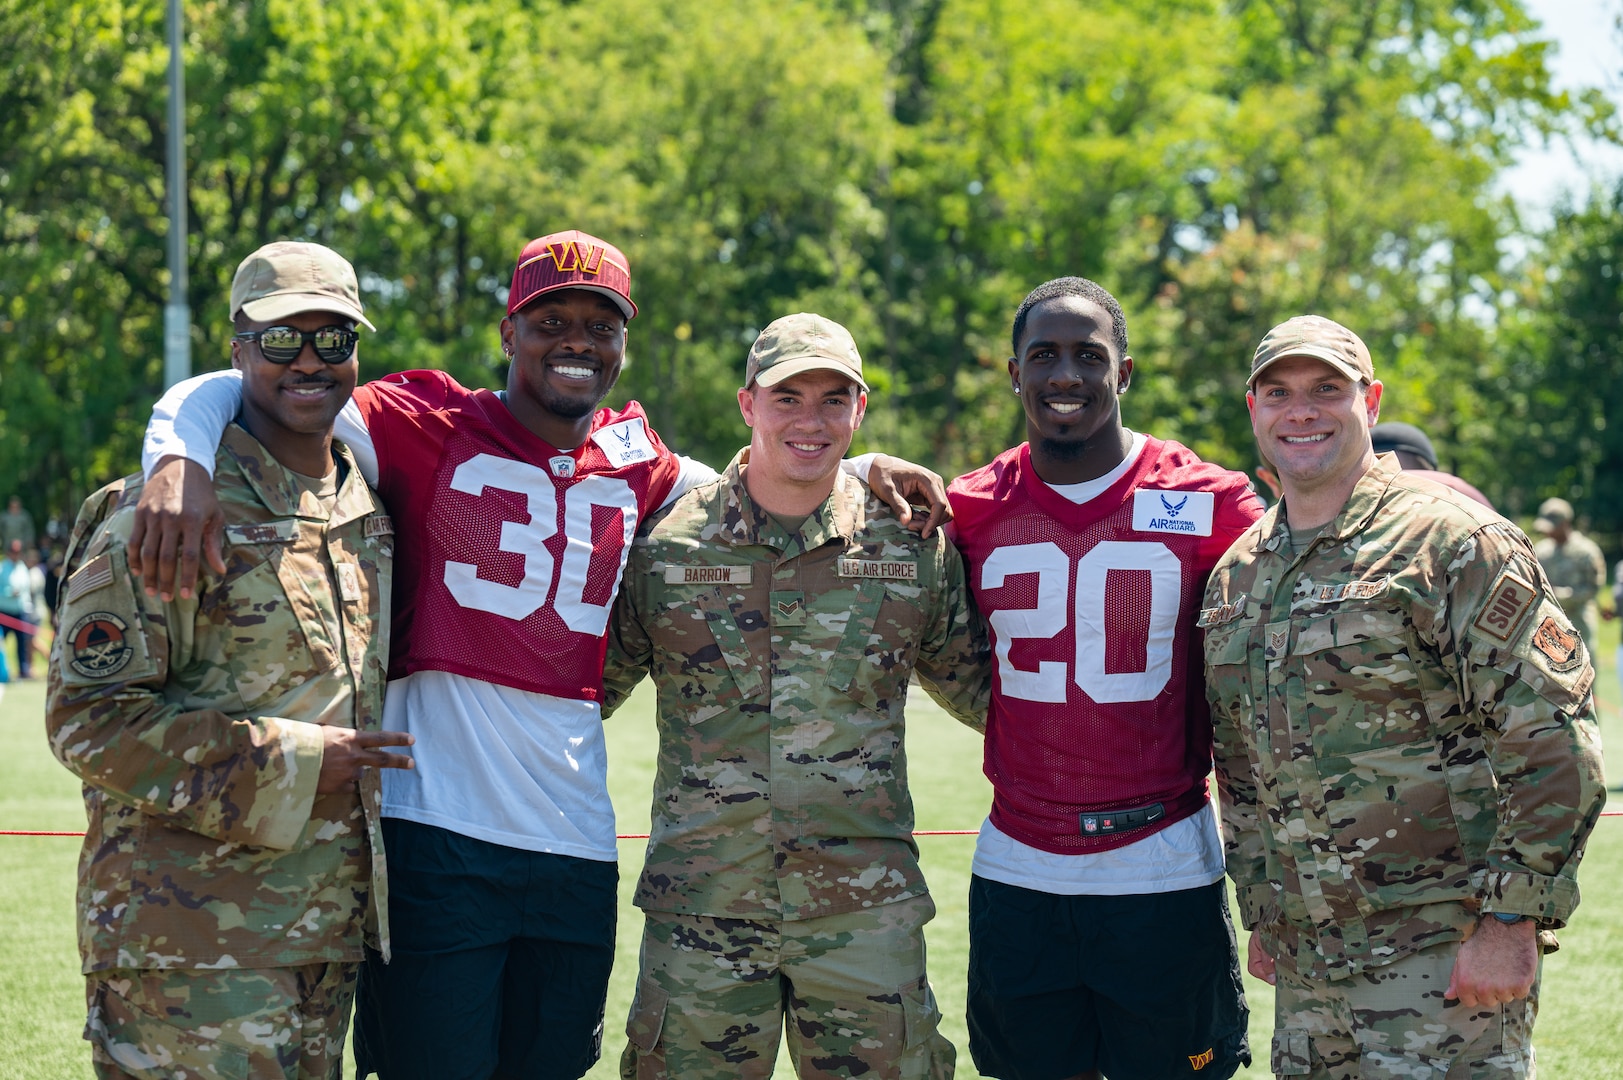 U.S. Air National Guard Airmen assigned to units within the national capital region pose for a photo with Washington Commanders football players during an open practice held at Joint Base Andrews, Maryland, Aug. 25, 2023. As part of a partnership between the Washington Commanders and U.S. Air Force, an Air National Guard patch will be featured on the Commanders defensive players’ practice jerseys this season to help garner exposure for recruiting the next generation of Airmen. (U.S. Air National Guard photo by Tech. Sgt. Sarah M. McClanahan)